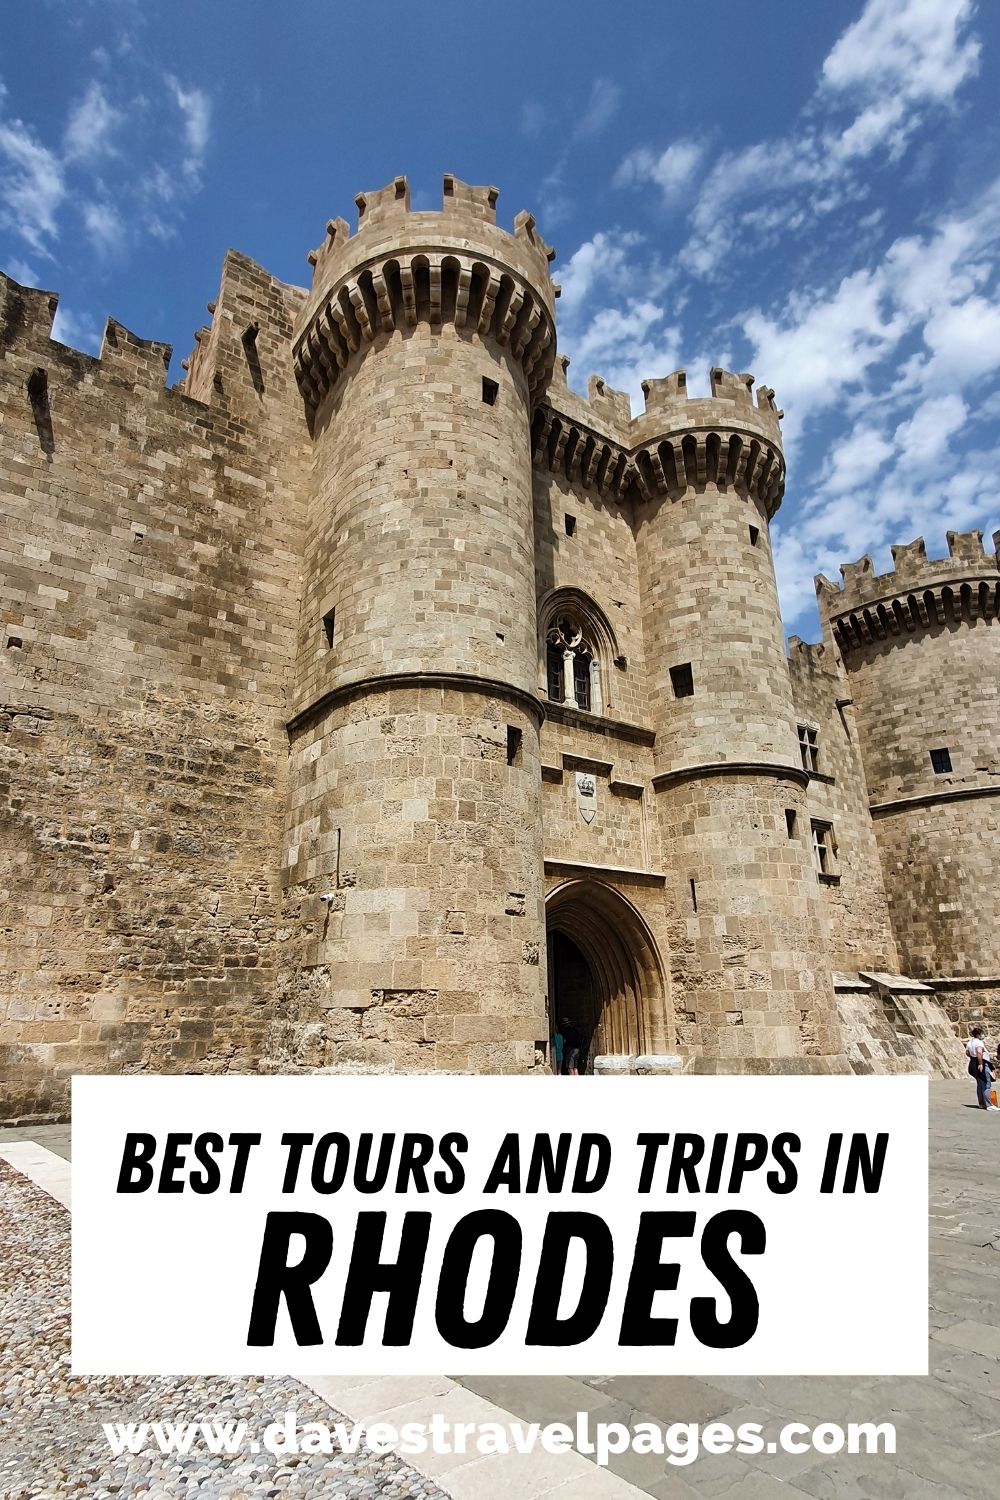 Best tours and trips in Rhodes Greece